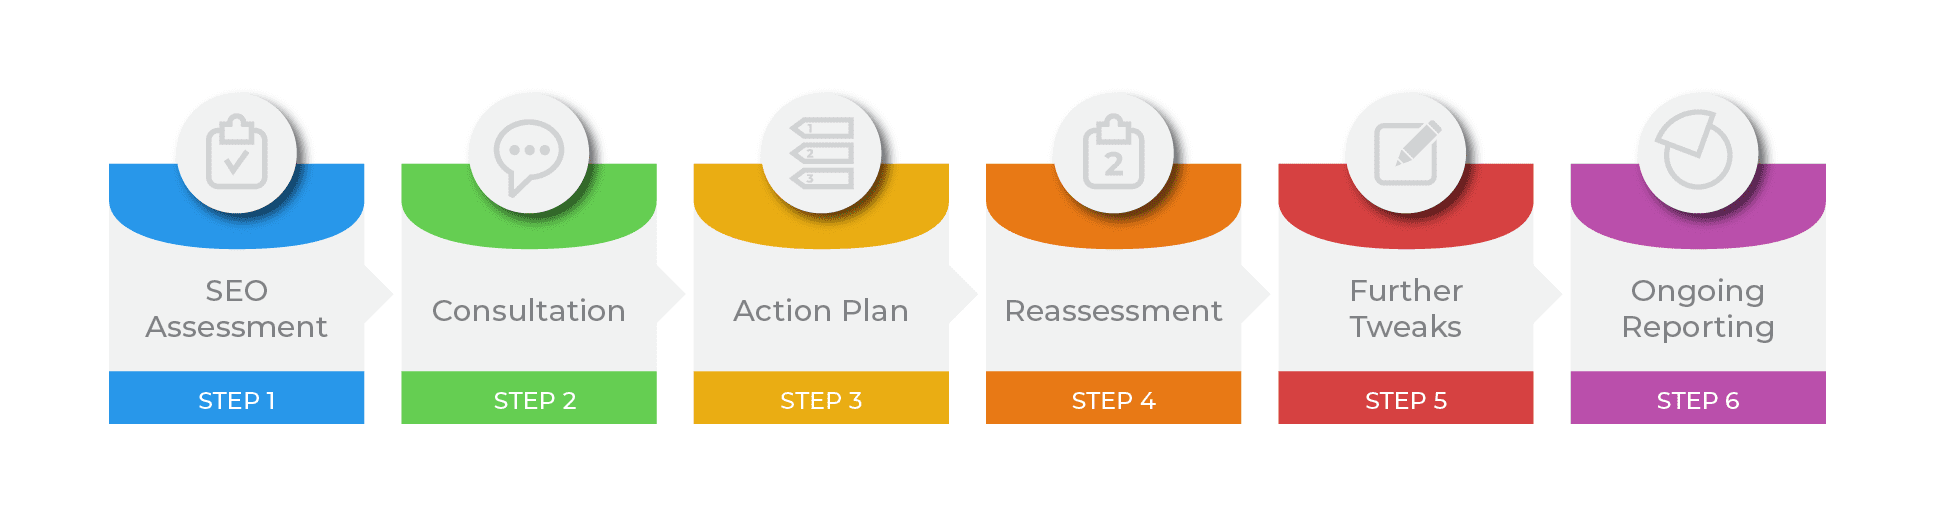 SEO assessment>Consultation>Action plan>Reassessment>Further tweaks>Ongoing reporting